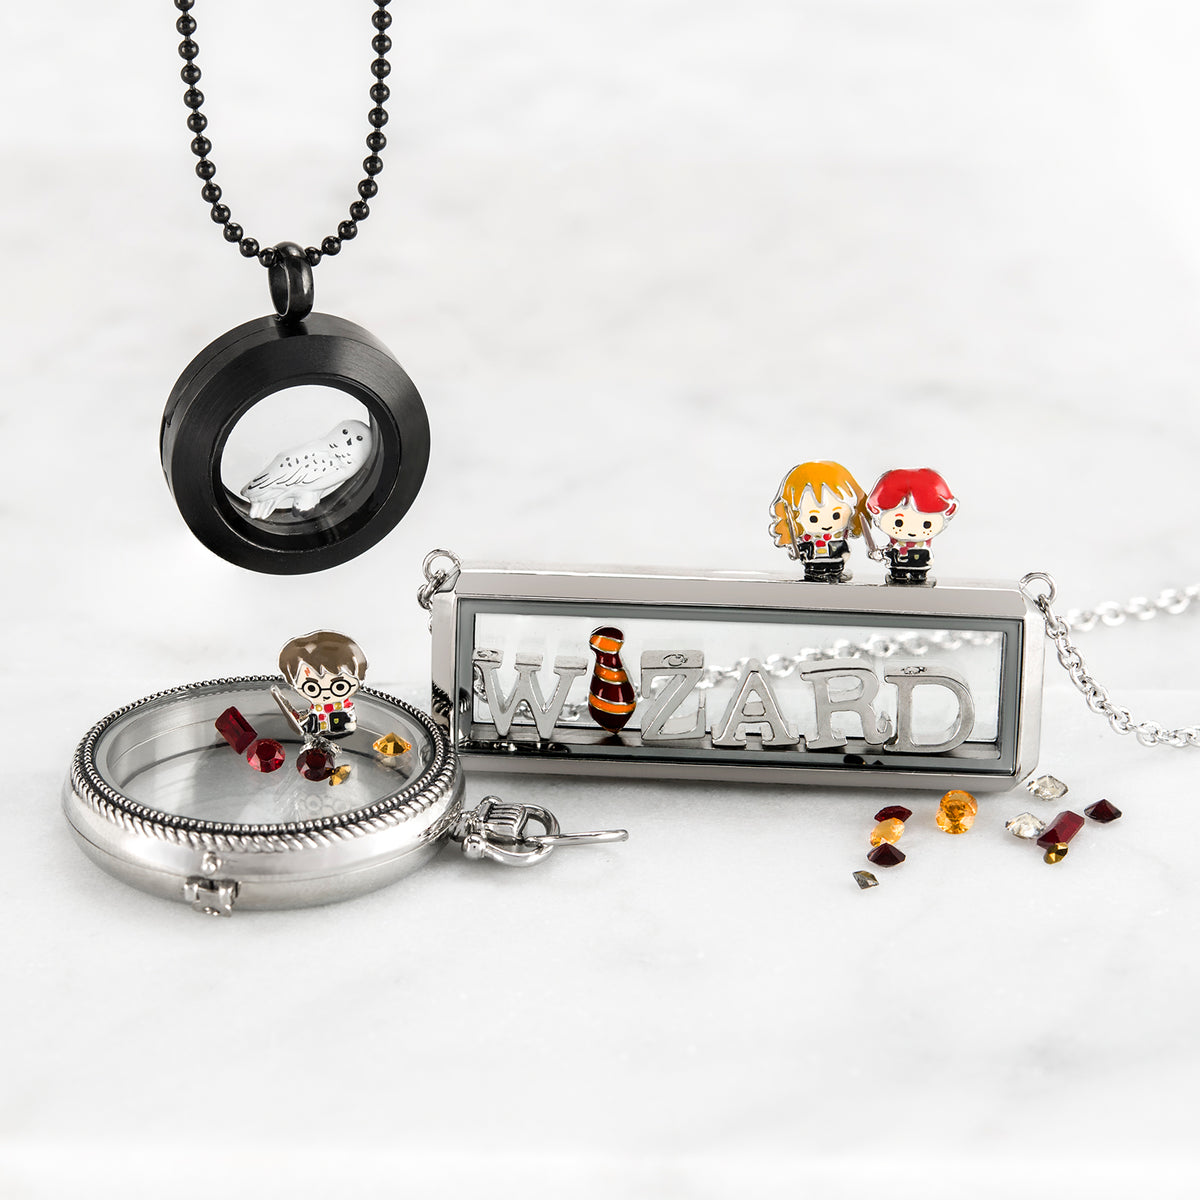 Origami Owl - Accio Harry Potter Charms…from the vault! In